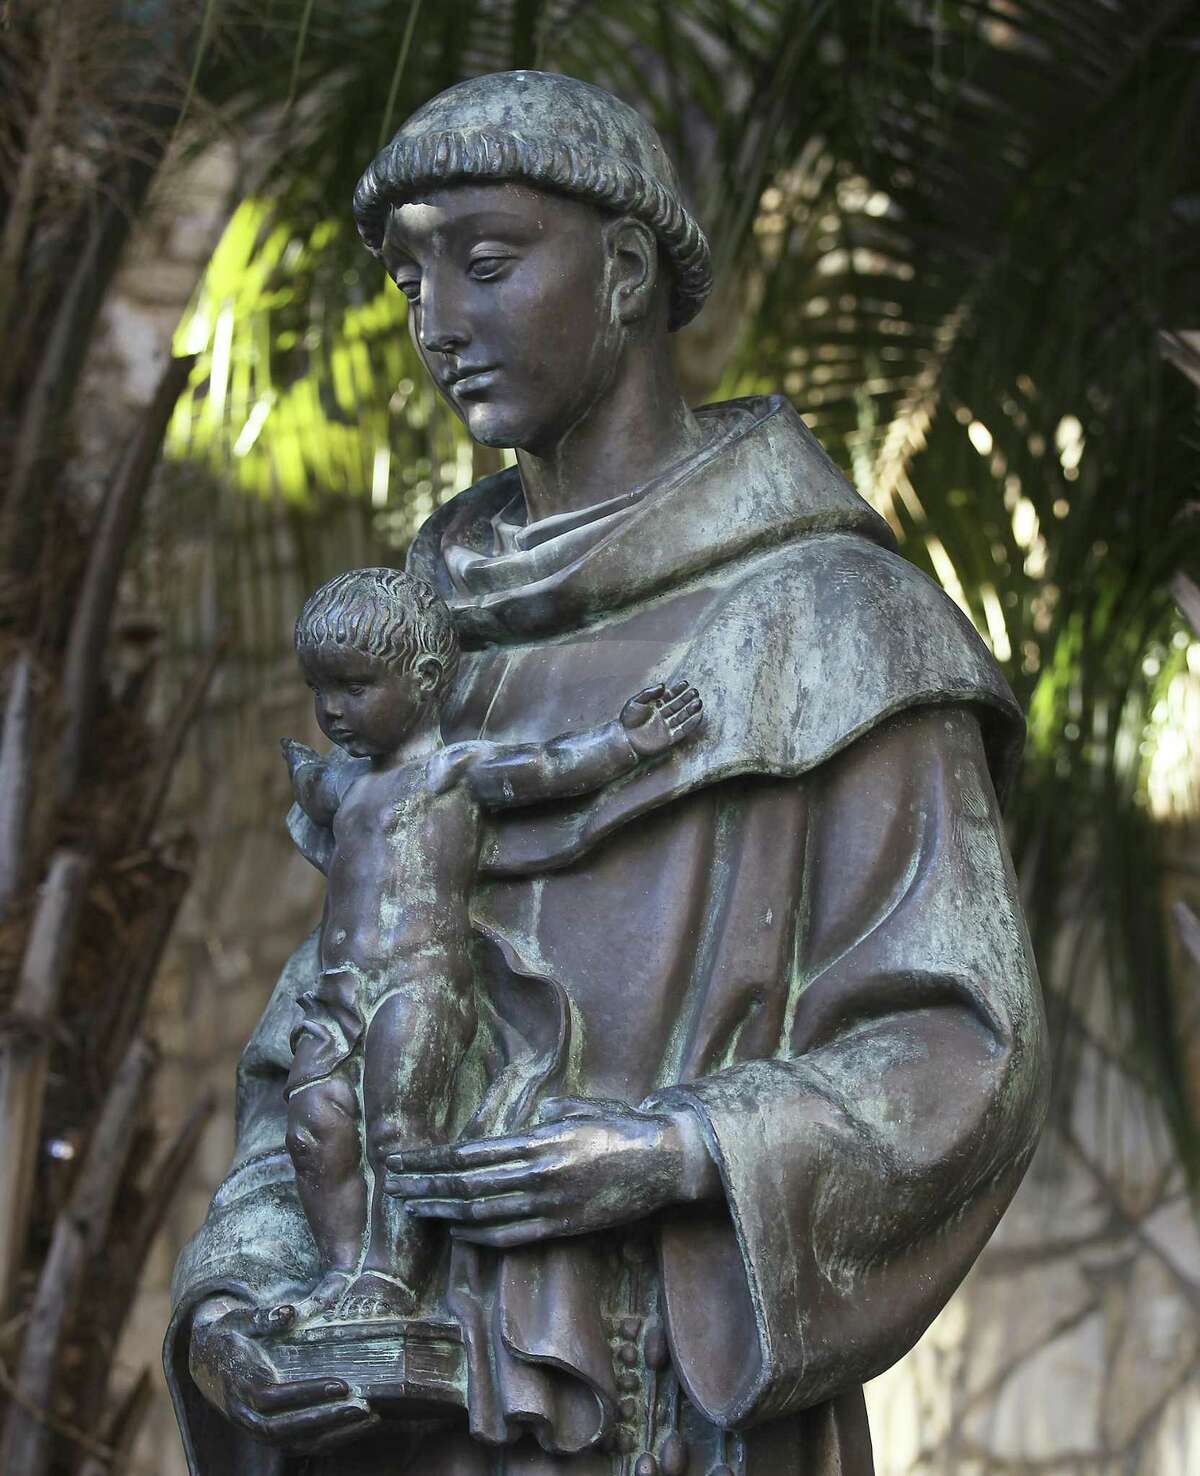 The statue of Saint Anthony of Padua along the River Walk. The seven-foot bronze statue was created by Portuguese sculptor Leopoldo de Almeida and presented to the city during the 1968 HemisFair. (Kin Man Hui/San Antonio Express-News)